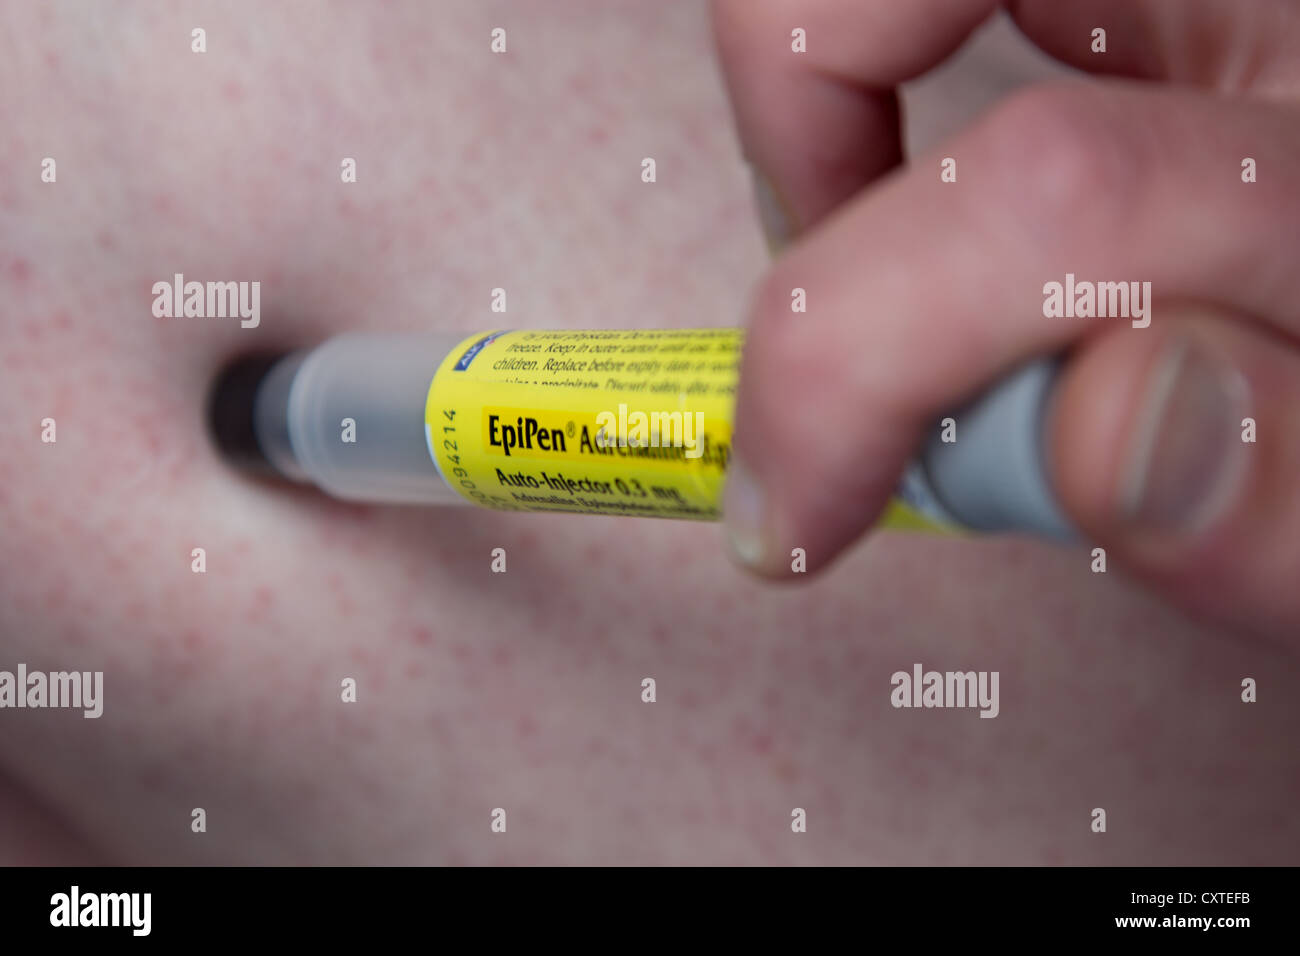 An acute allergy sufferer preparing to inject adrenaline into his leg using an EpiPen injector Stock Photo